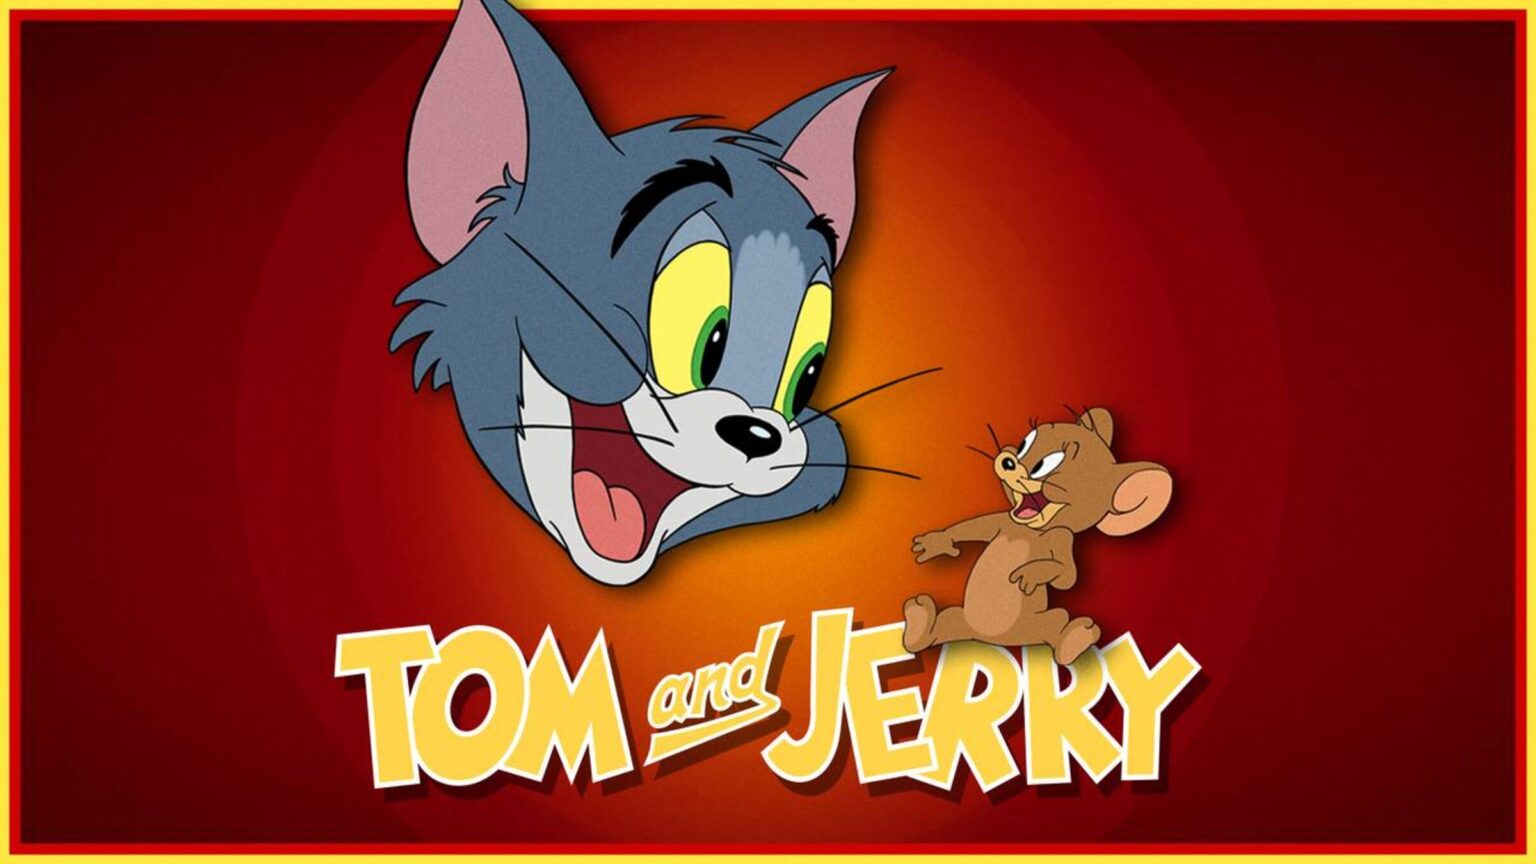 Some cartoons should just stay cartoons *cough* 'Tom and Jerry' movie. Peruse through the most notoriously terrible live-action films based on cartoons.